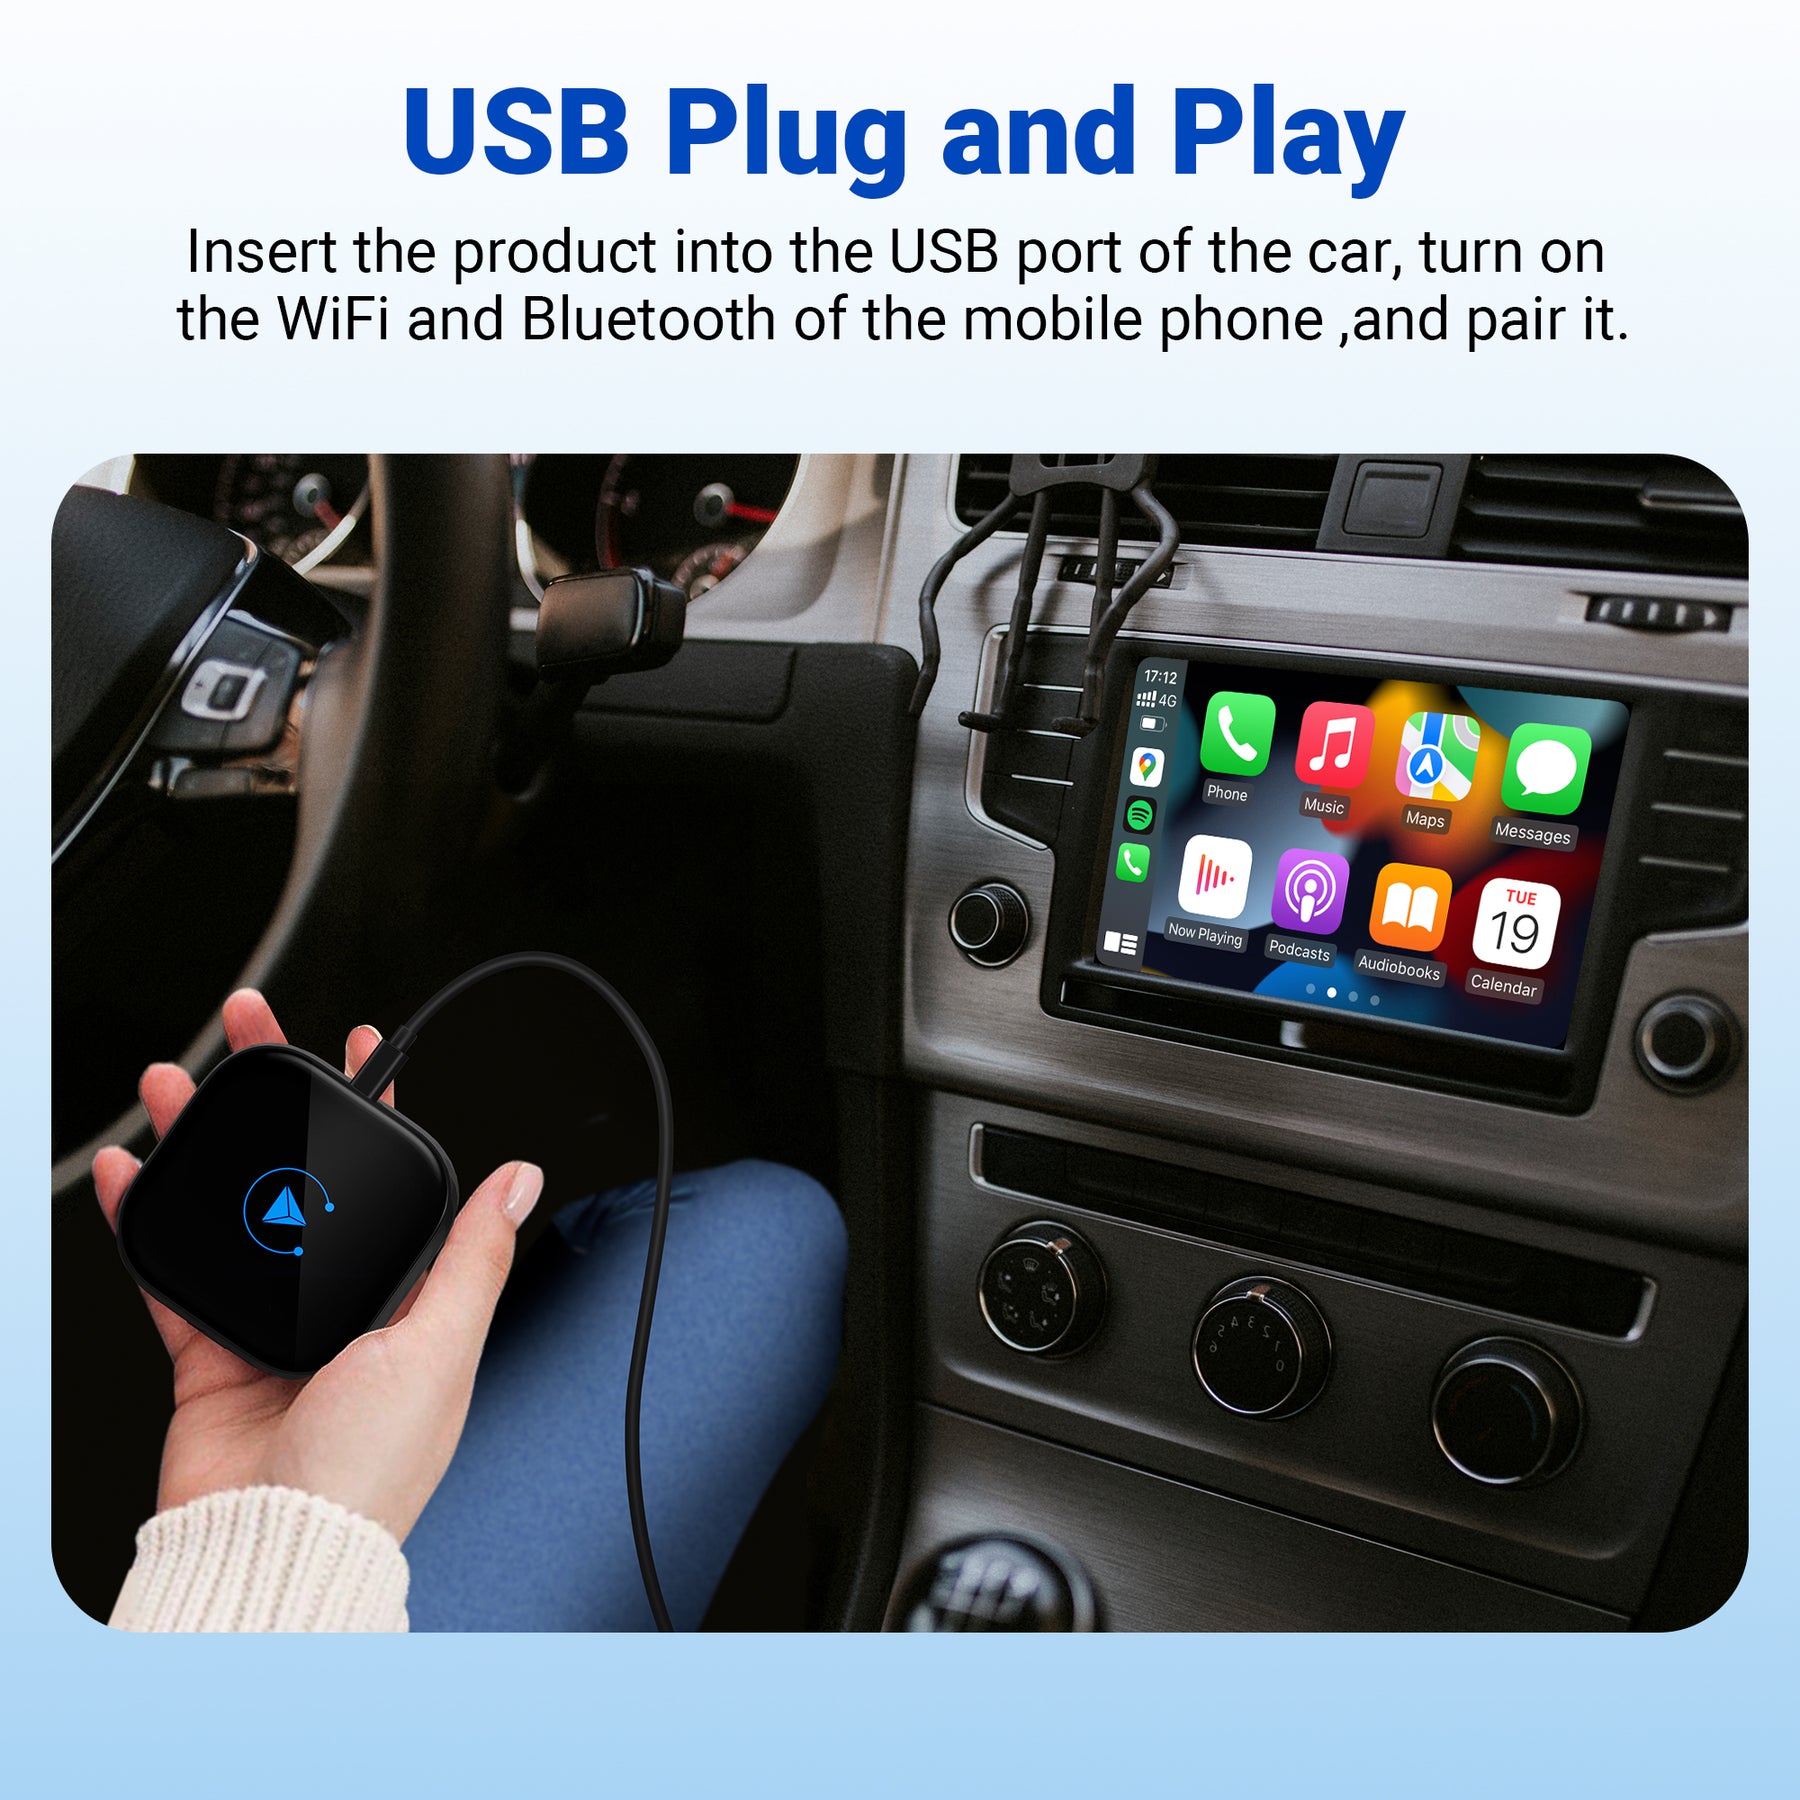 💥BOX2Channel-The Smart Wireless CarPlay/Android Auto Link 💥Spring Sale💥